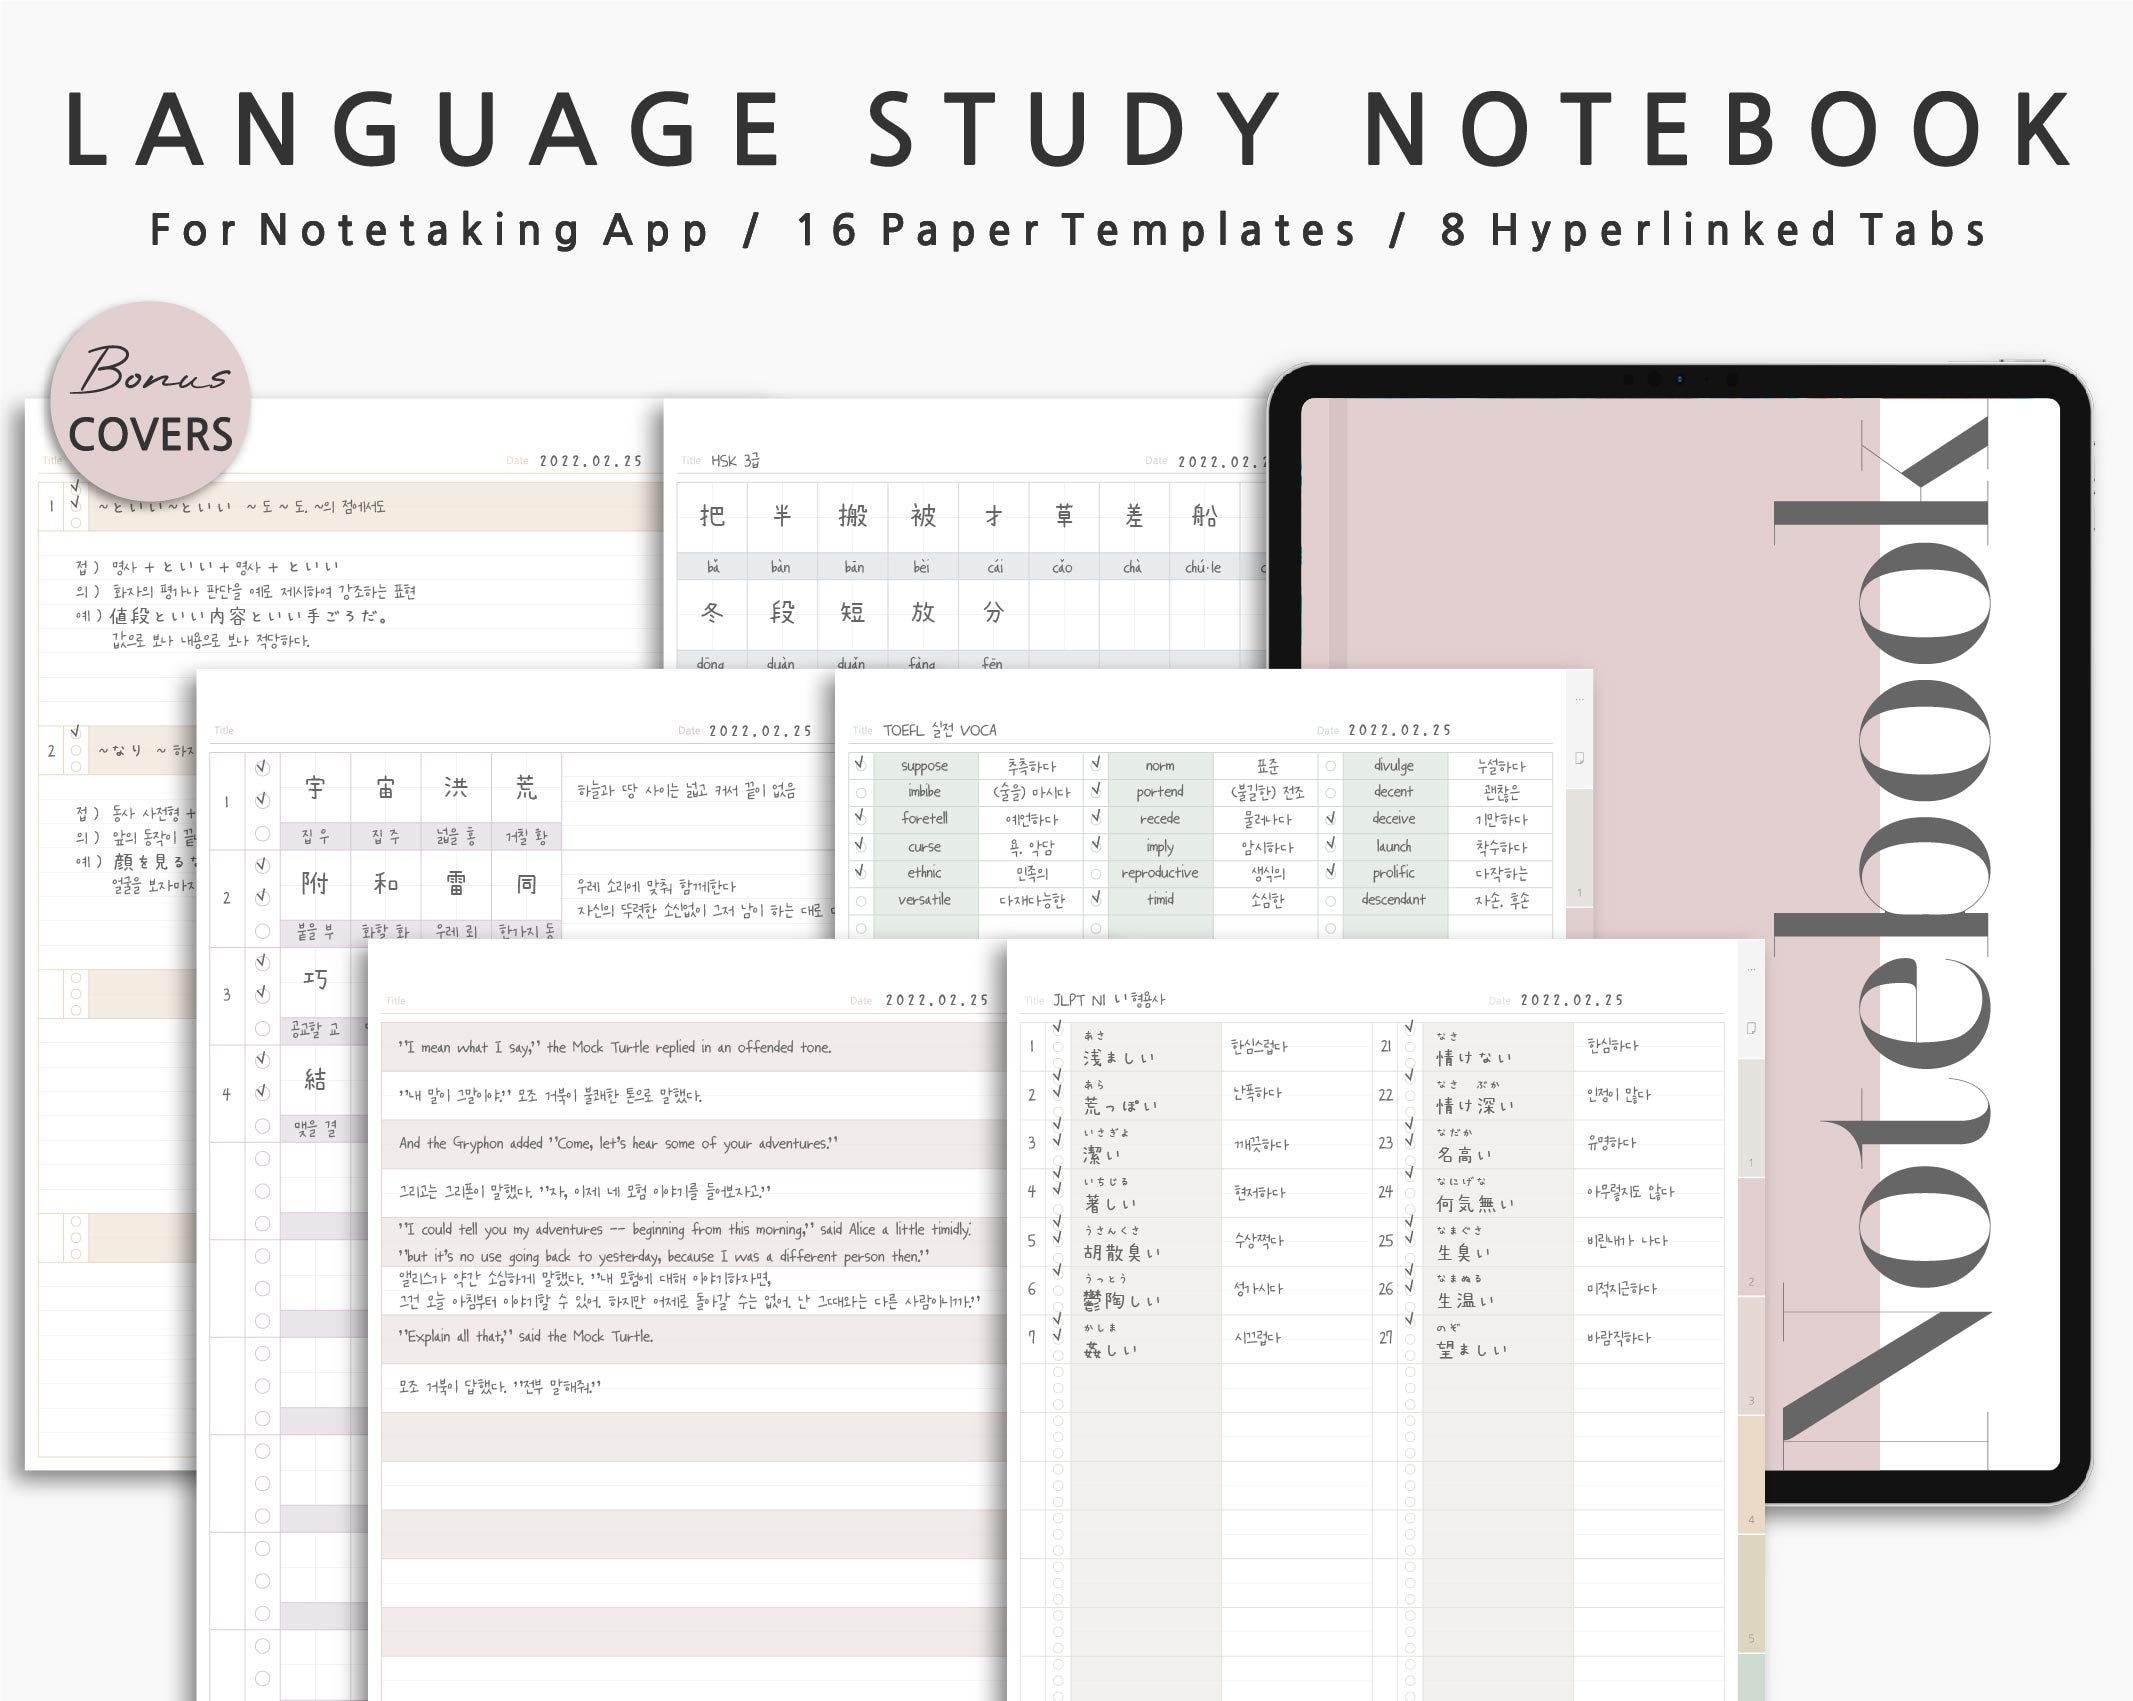 Note-Taking Template for Journal Articles – Learning Center